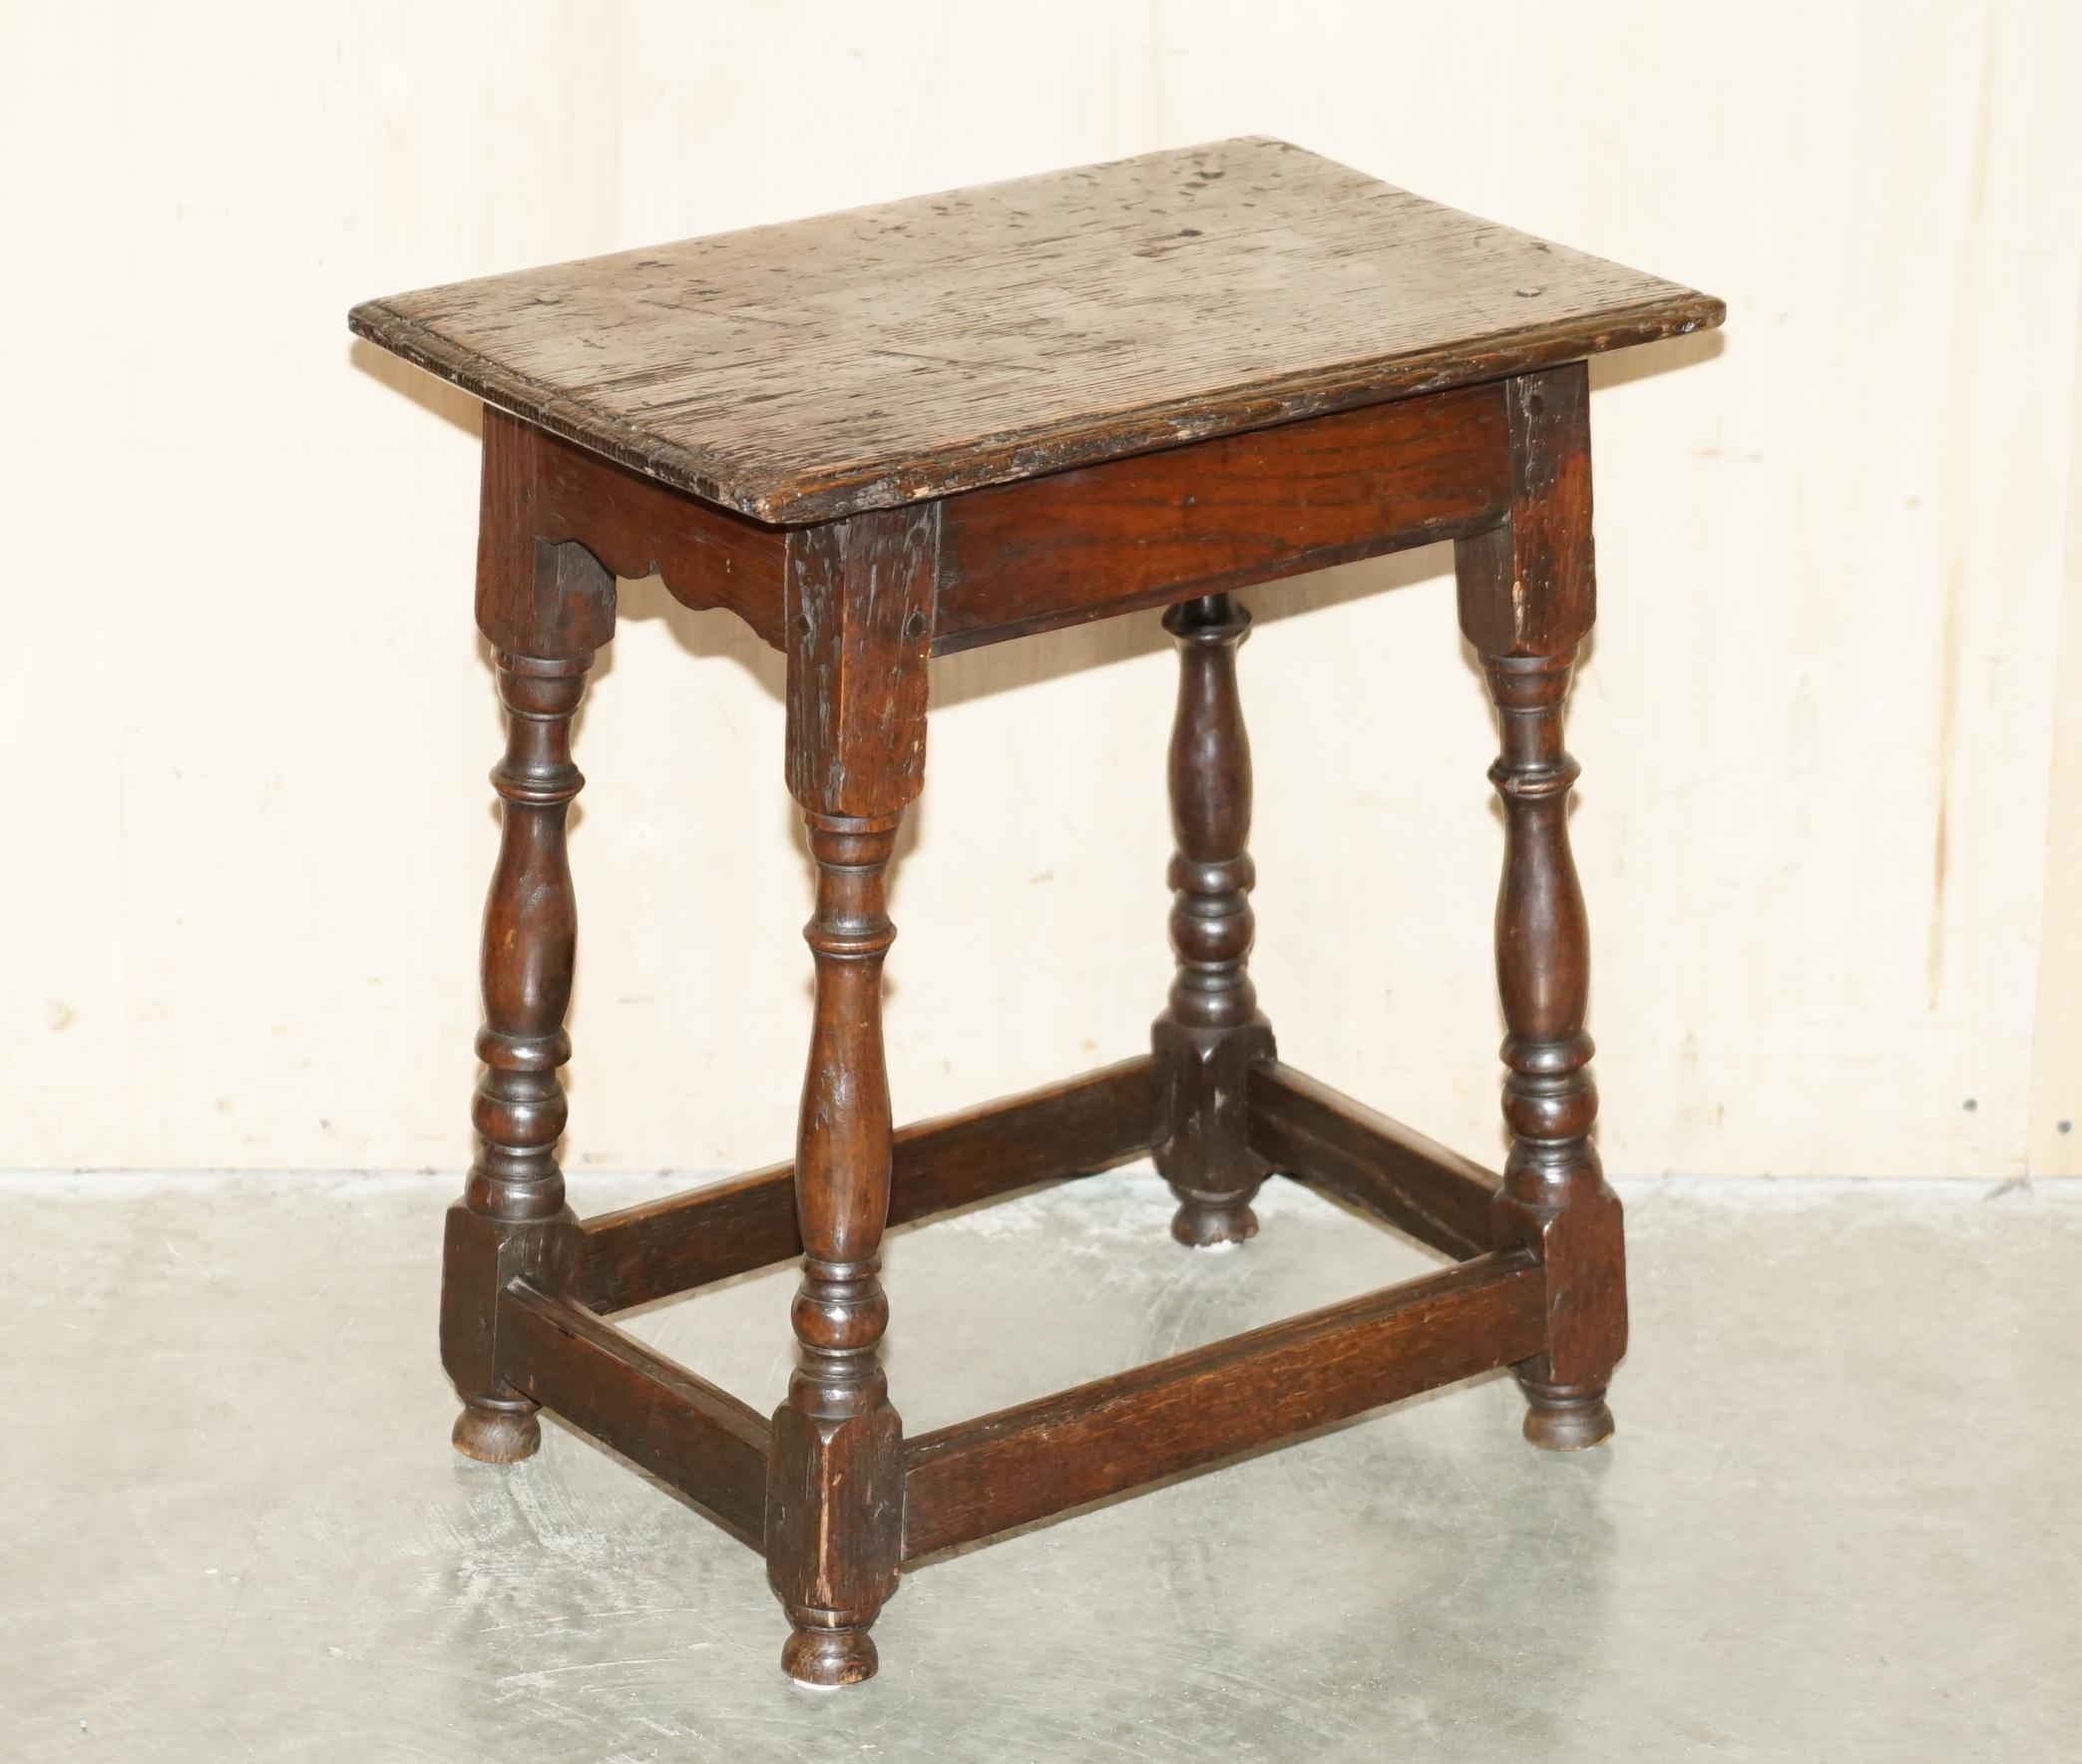 Royal House Antiques

Royal House Antiques is delighted to offer for sale this really quite lovely hand made in England 17th century side table or stool

Please note the delivery fee listed is just a guide, it covers within the M25 only for the UK